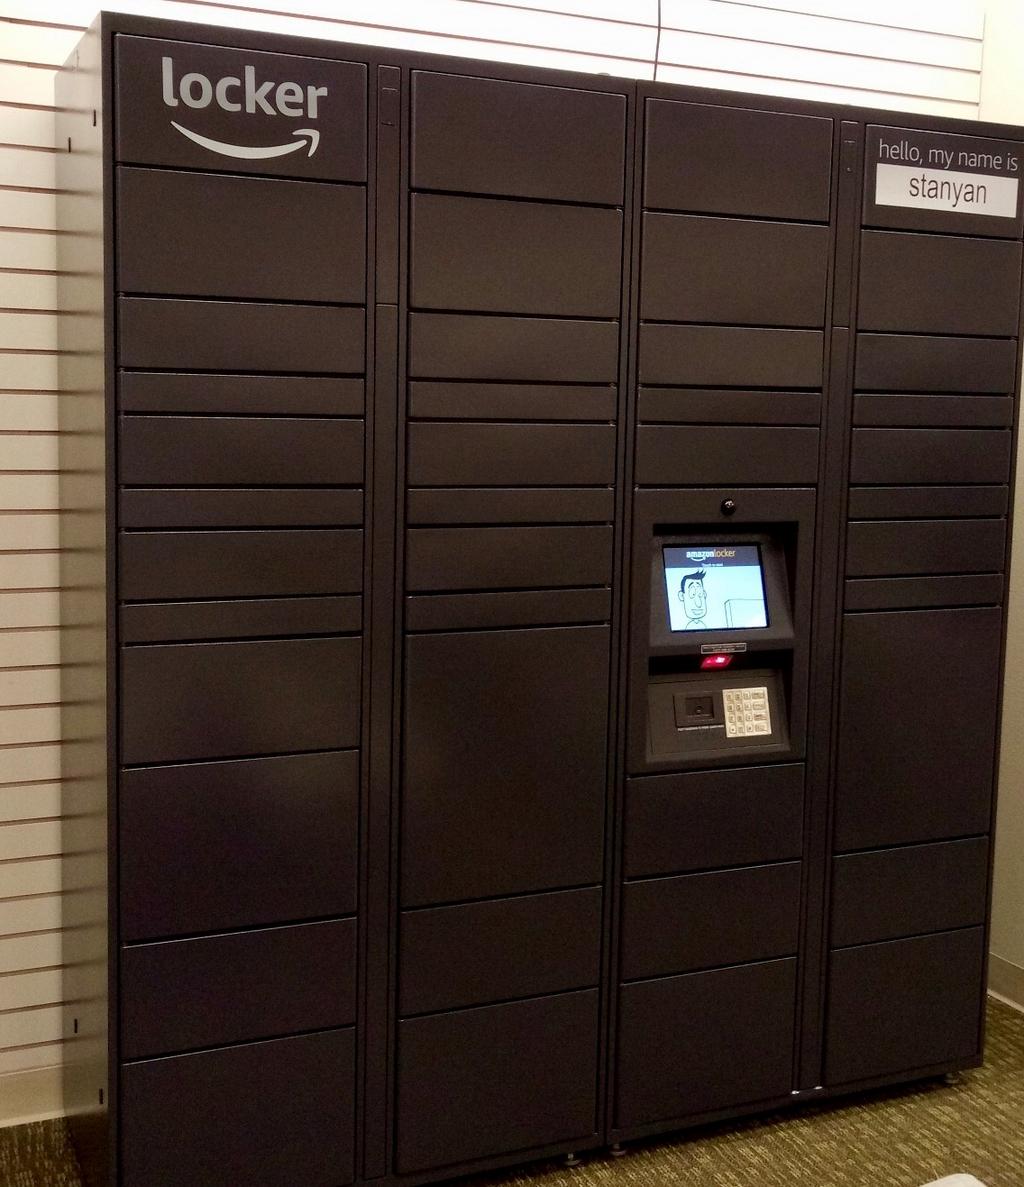 Stein Mart embraces the enemy with installation of  Lockers